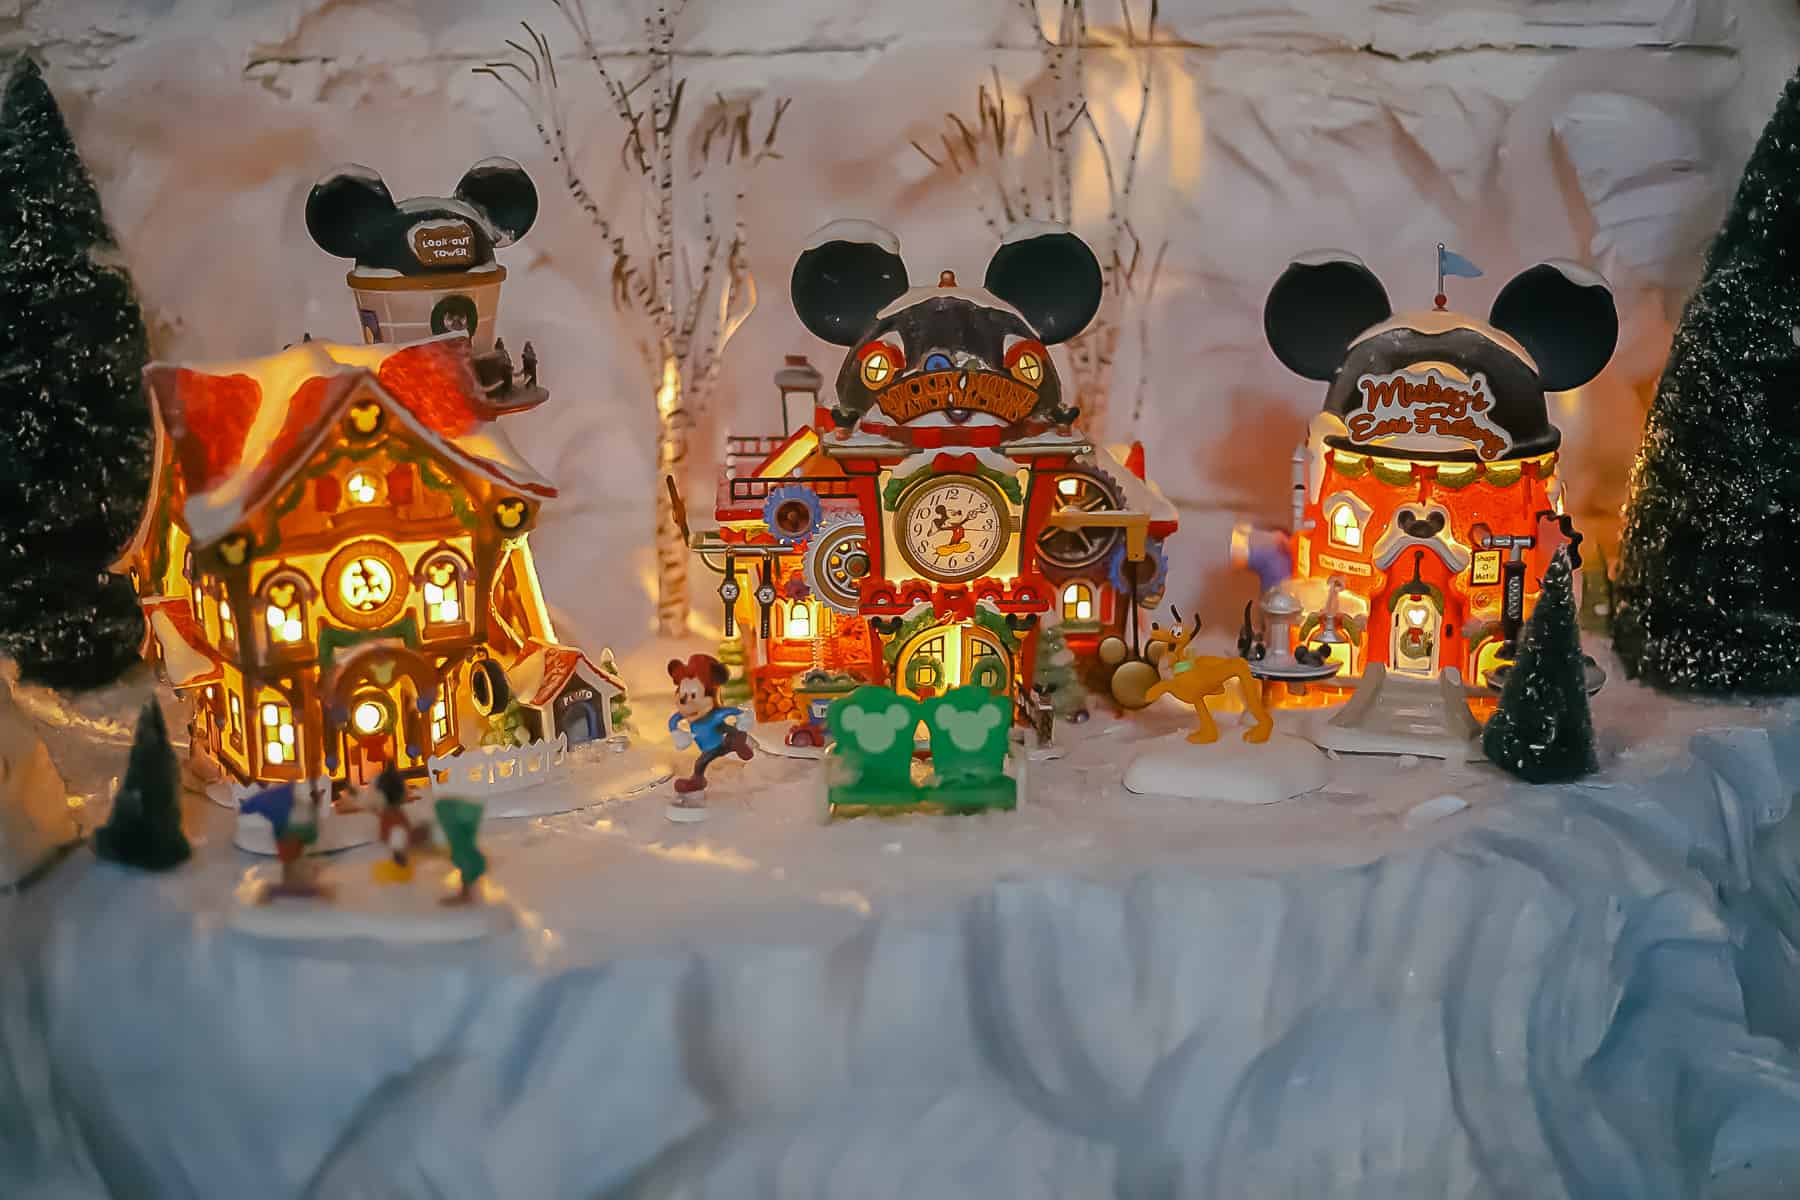 Mickey's Christmas Village is part of the train display at Disney's Yacht Club. 